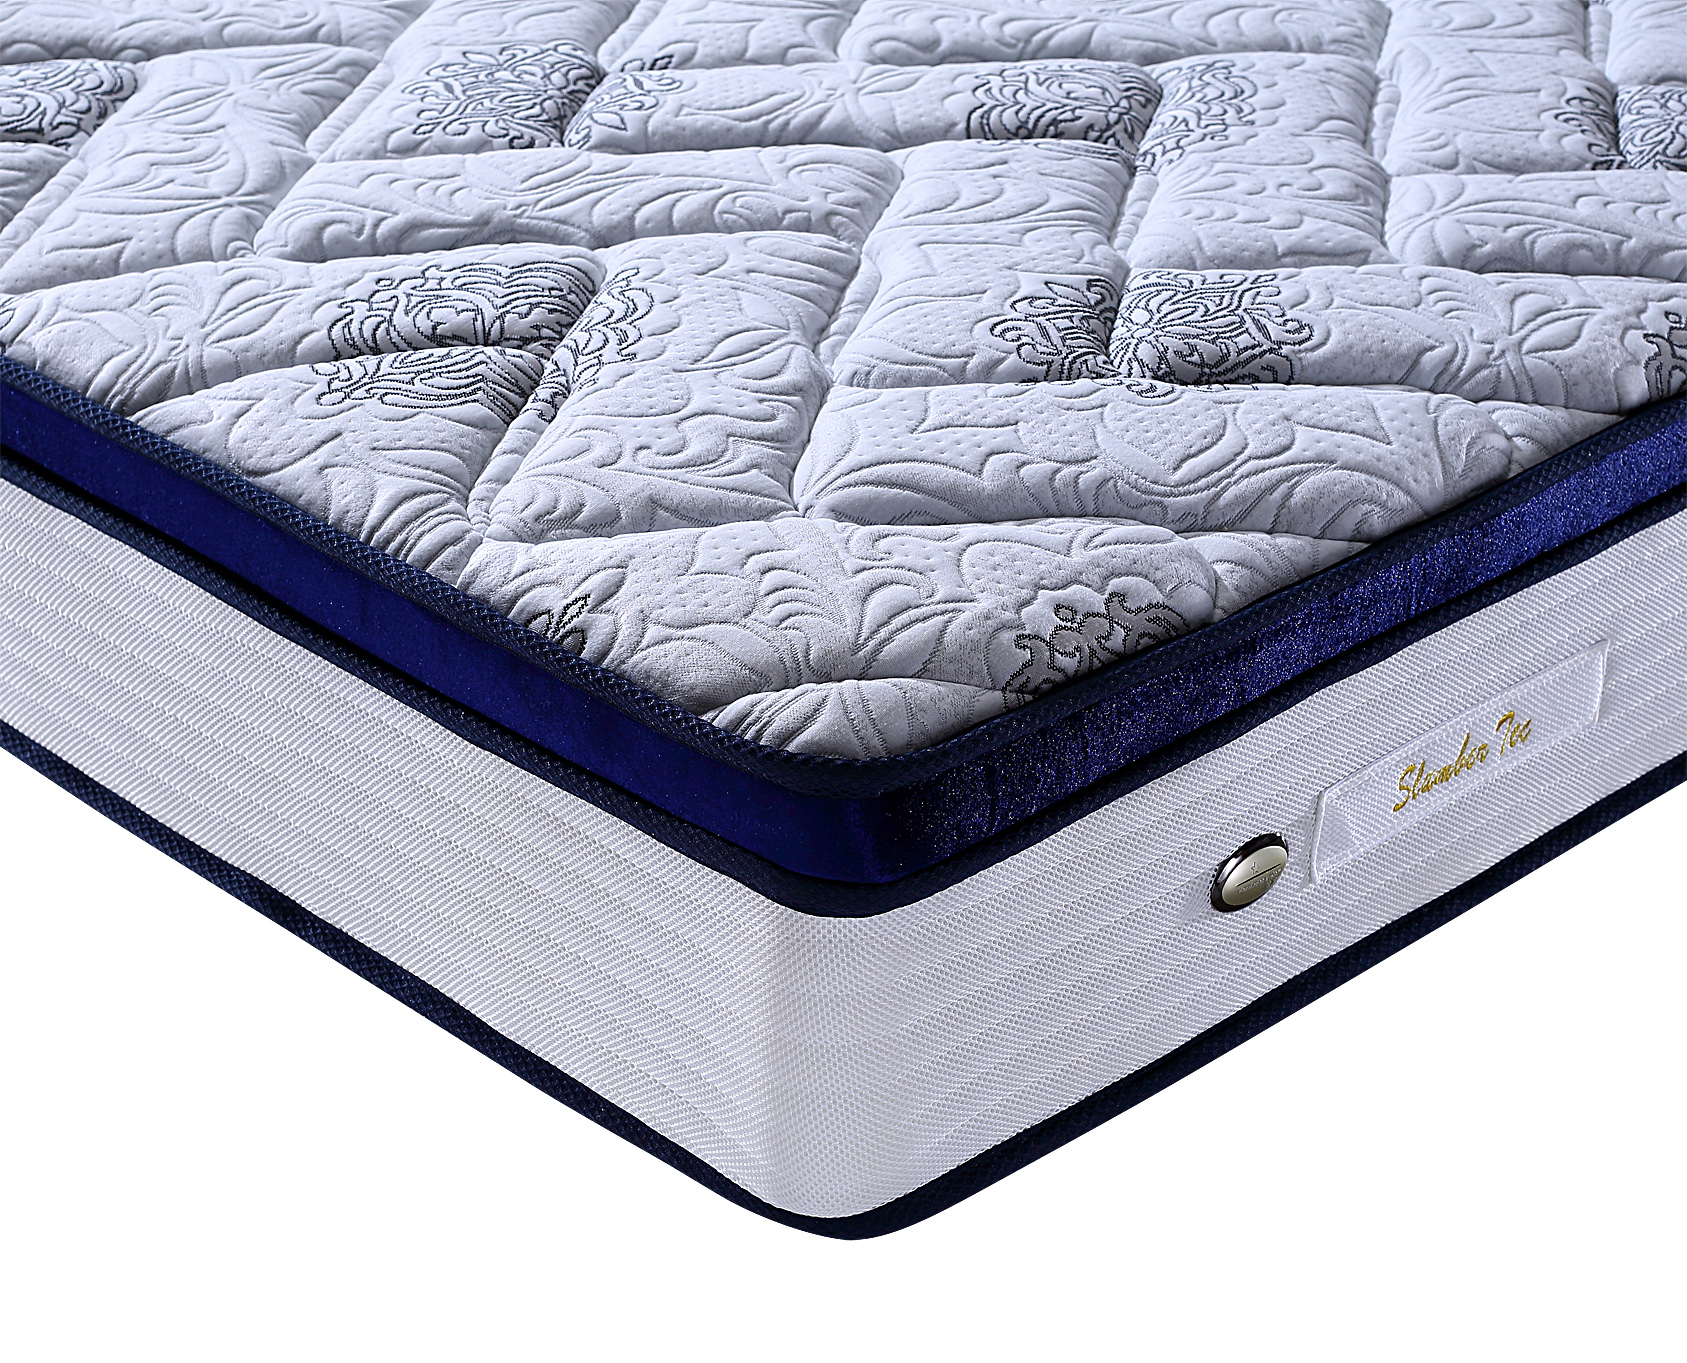 rooms direct mattress & furniture for less